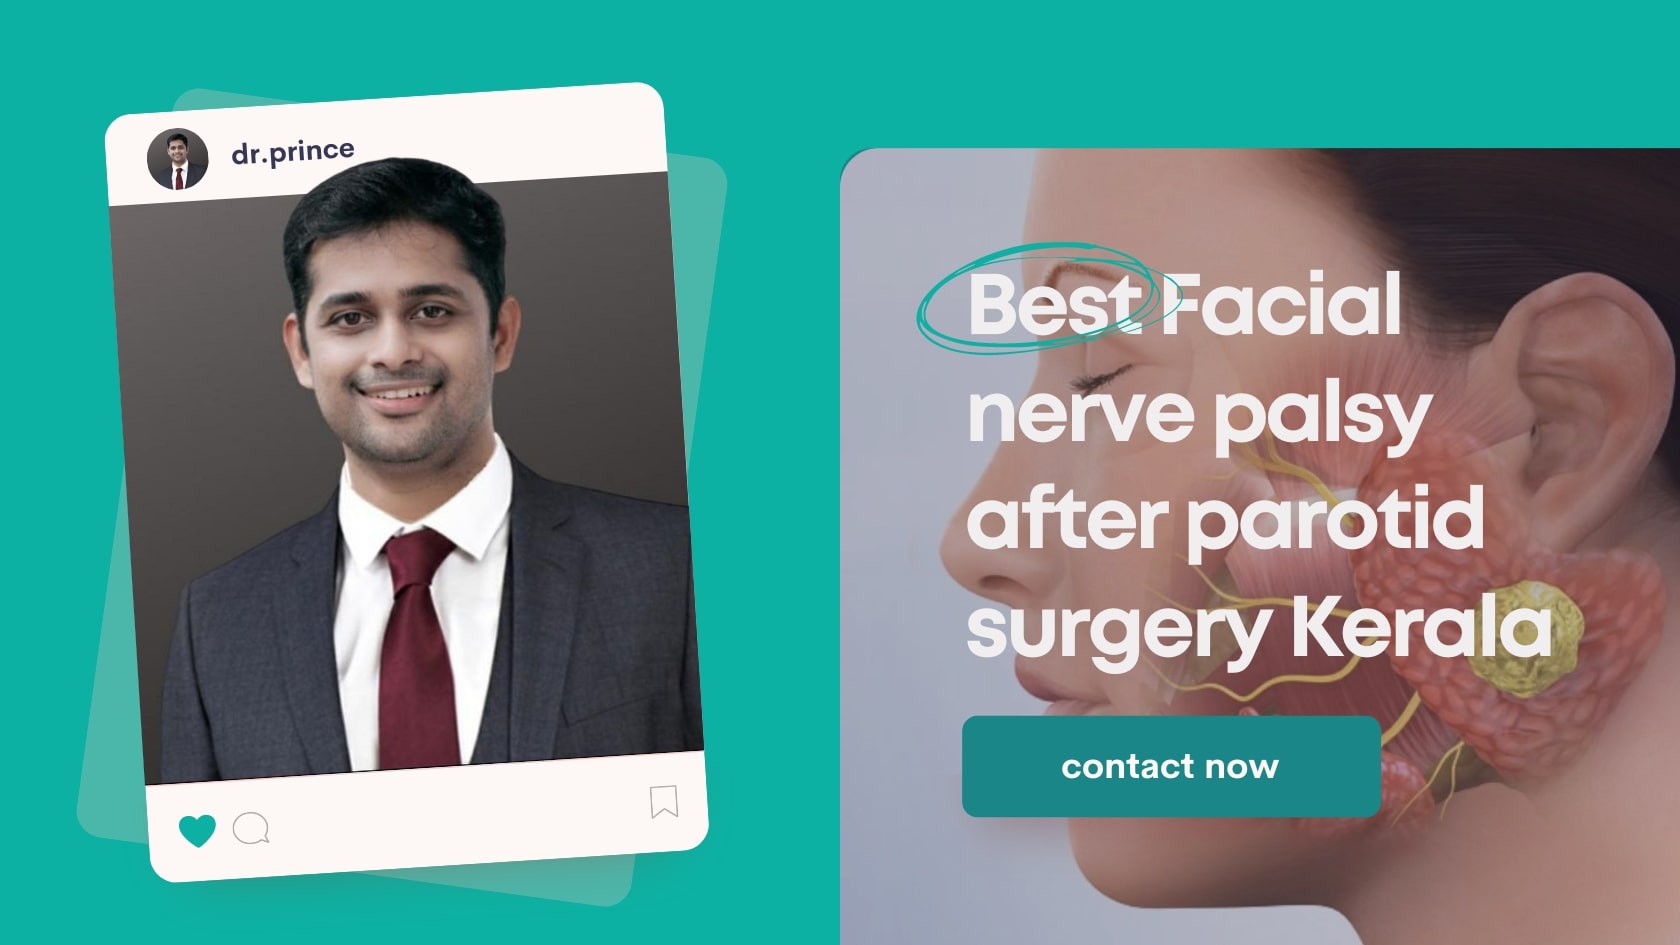 Dr. Prince, Leading Specialist in Facial Nerve Palsy Treatment After Parotid Surgery in Kerala